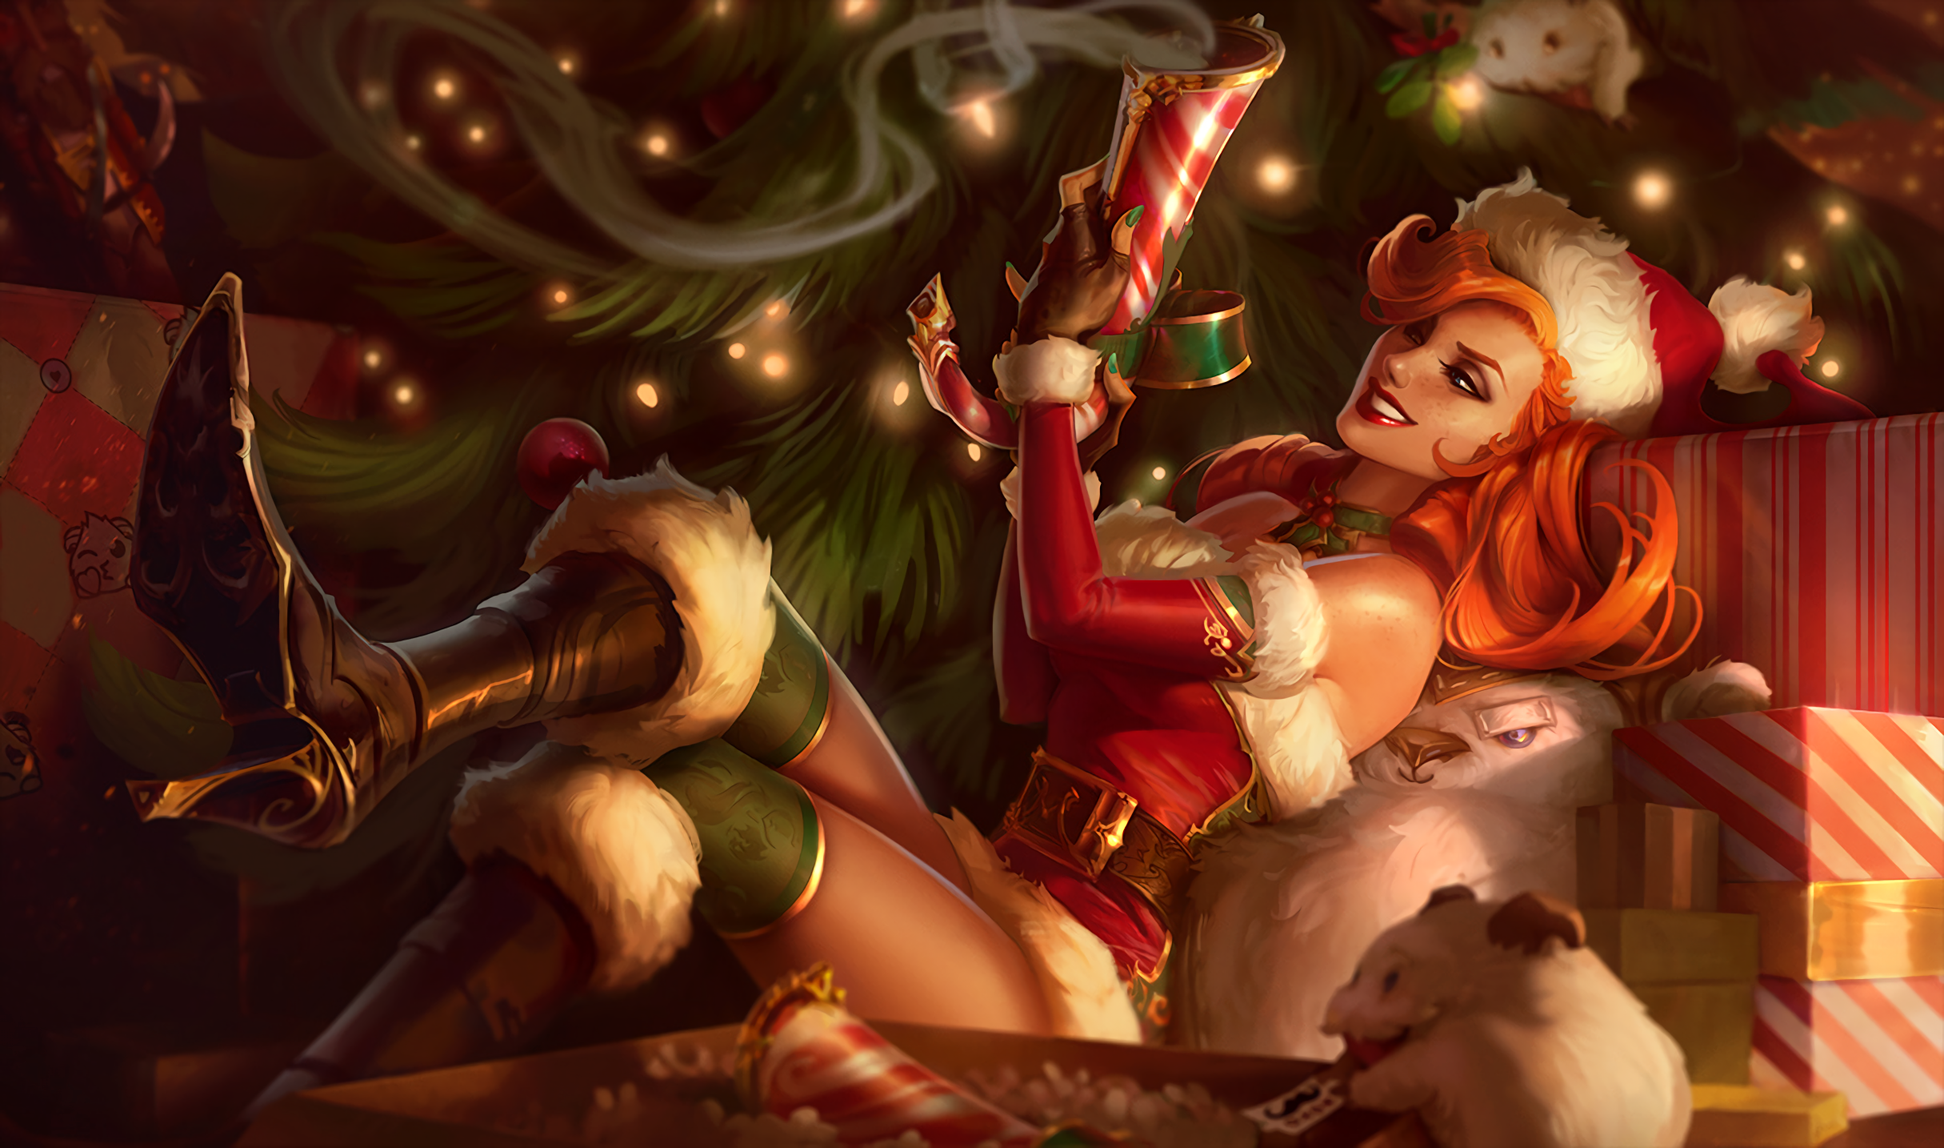 General 1944x1148 Miss Fortune (League of Legends) League of Legends weapon fantasy girl Christmas legs redhead